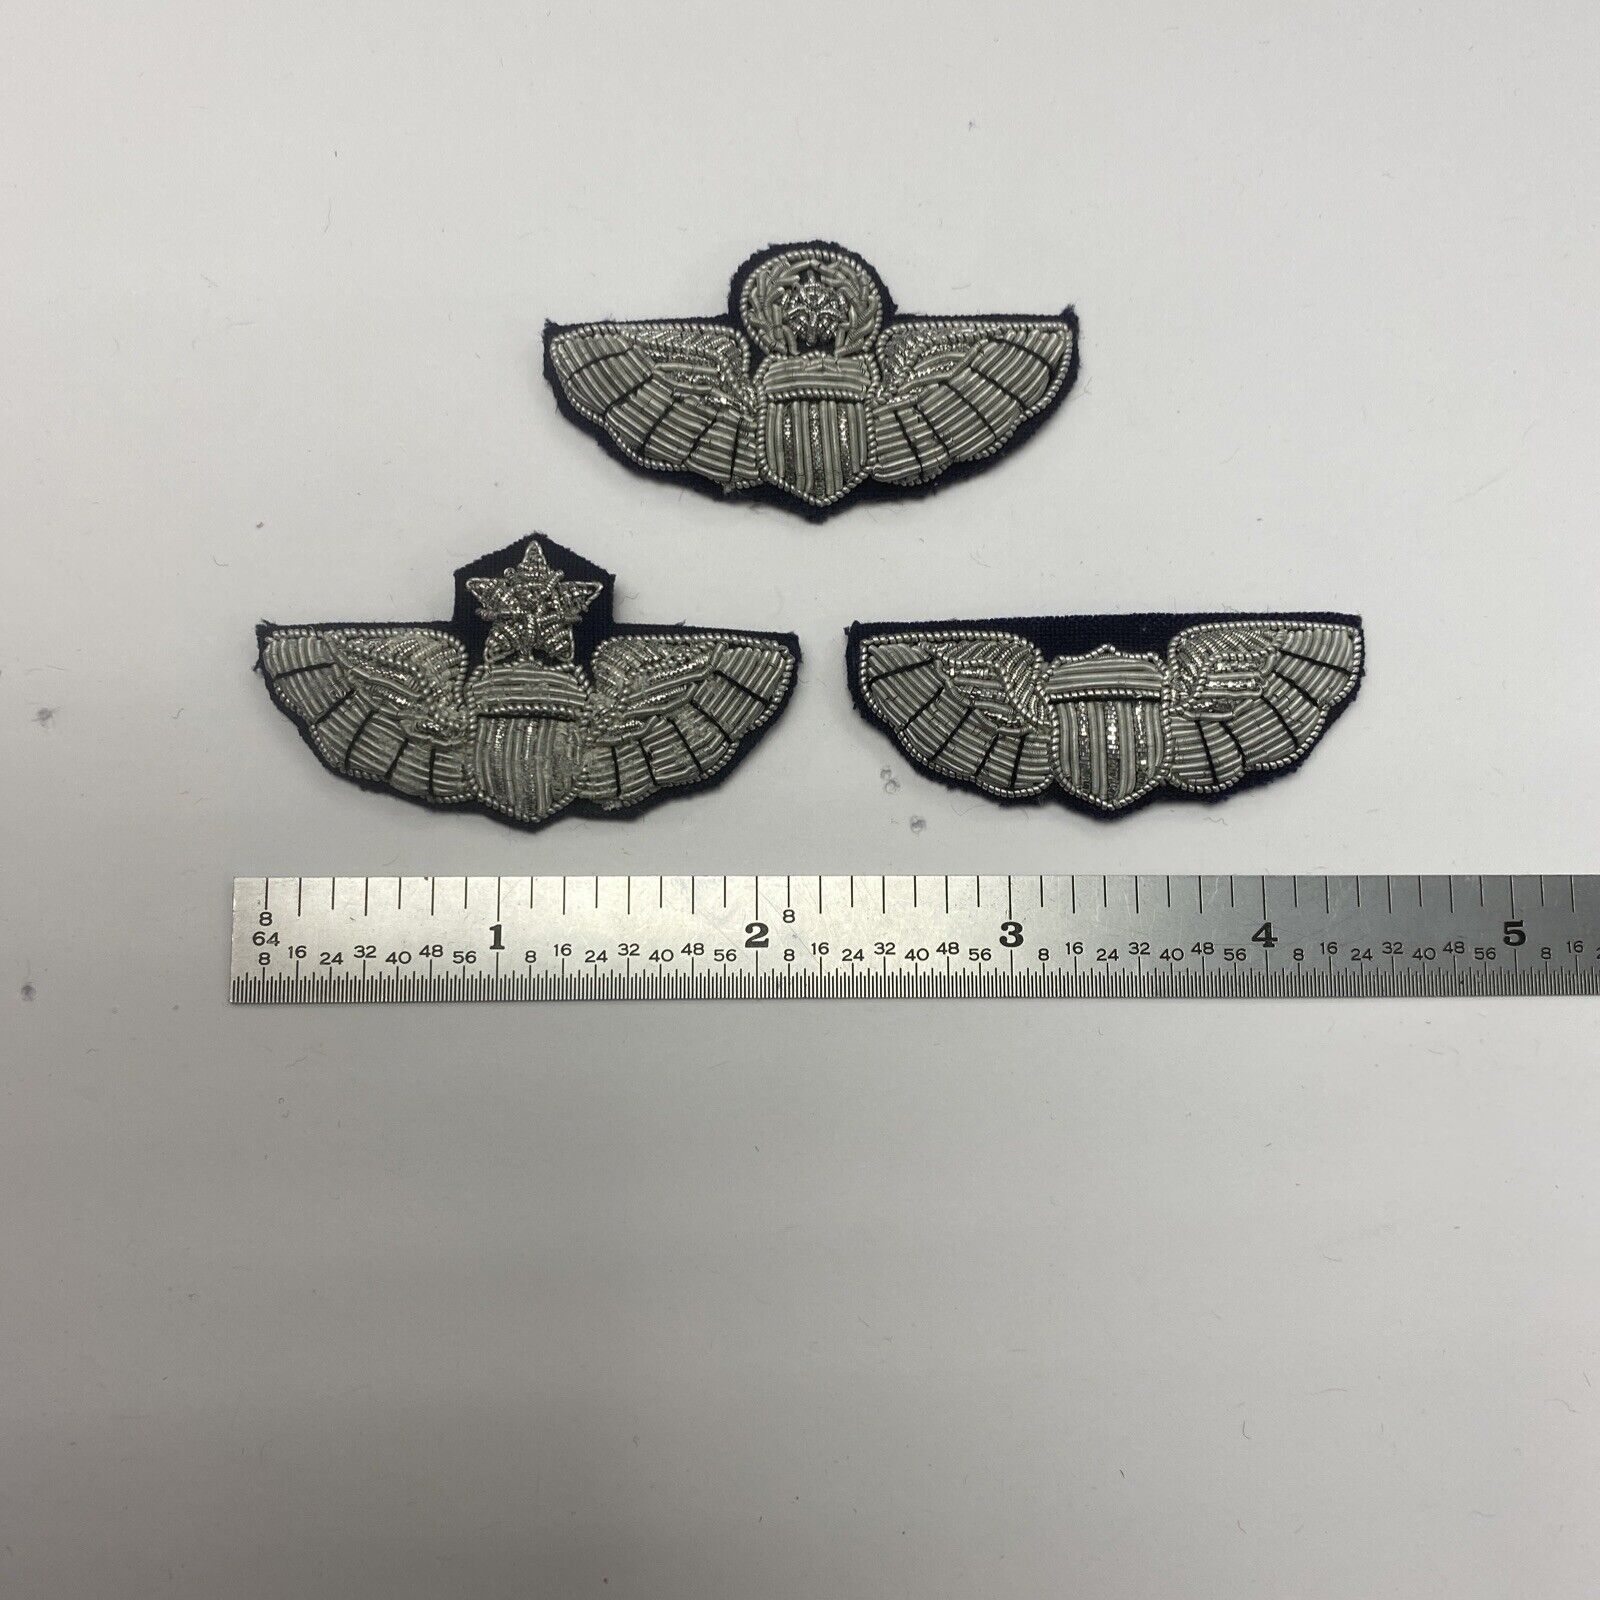 Vintage Air Force Silver Bullion Insignia Pin- Pilot Wings - Command, Sr, Basic